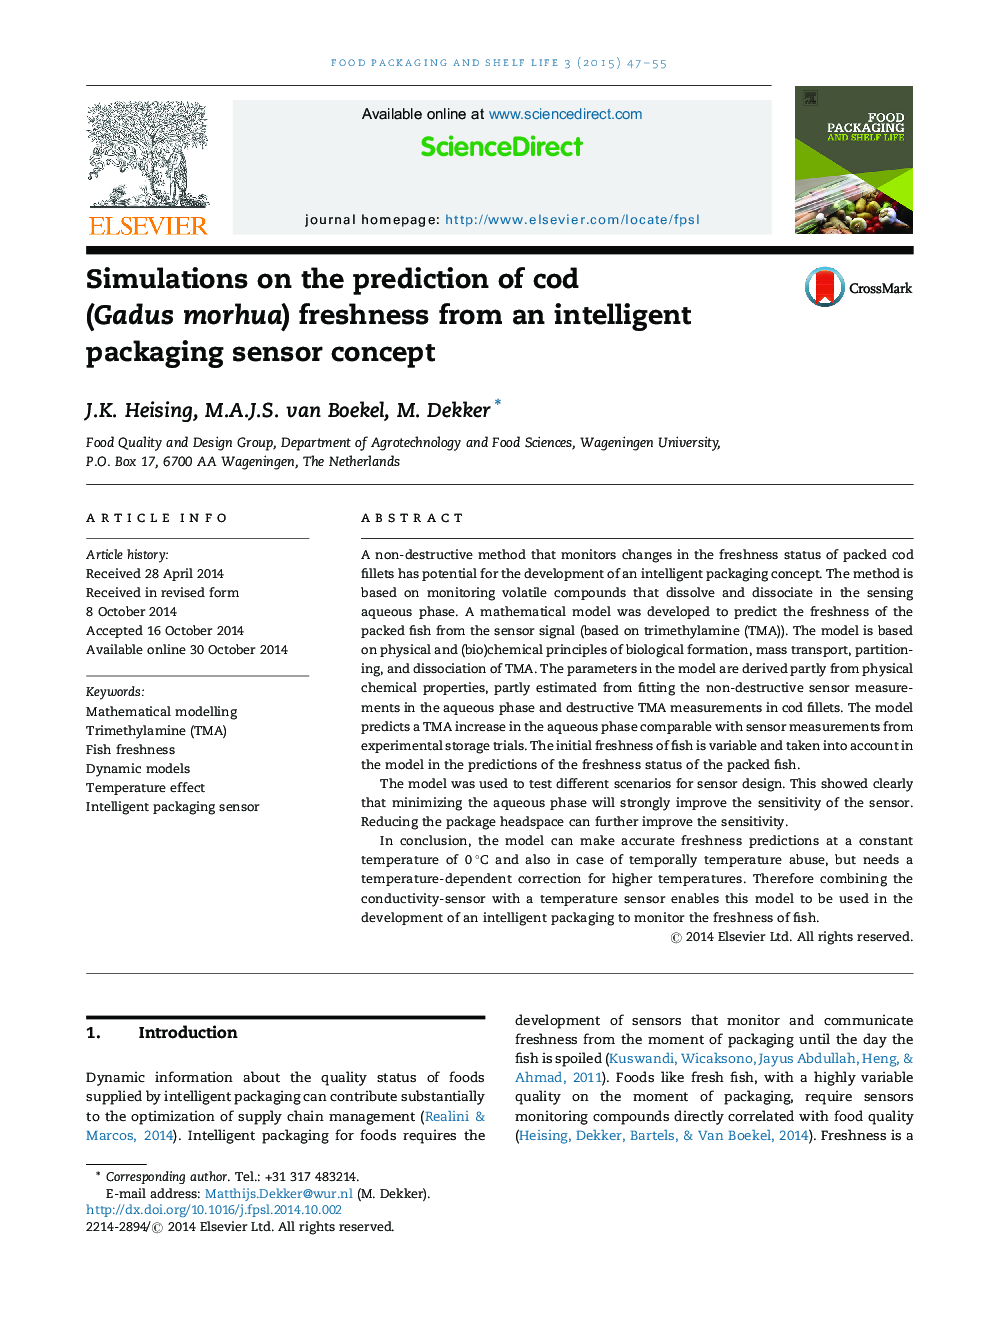 Simulations on the prediction of cod (Gadus morhua) freshness from an intelligent packaging sensor concept